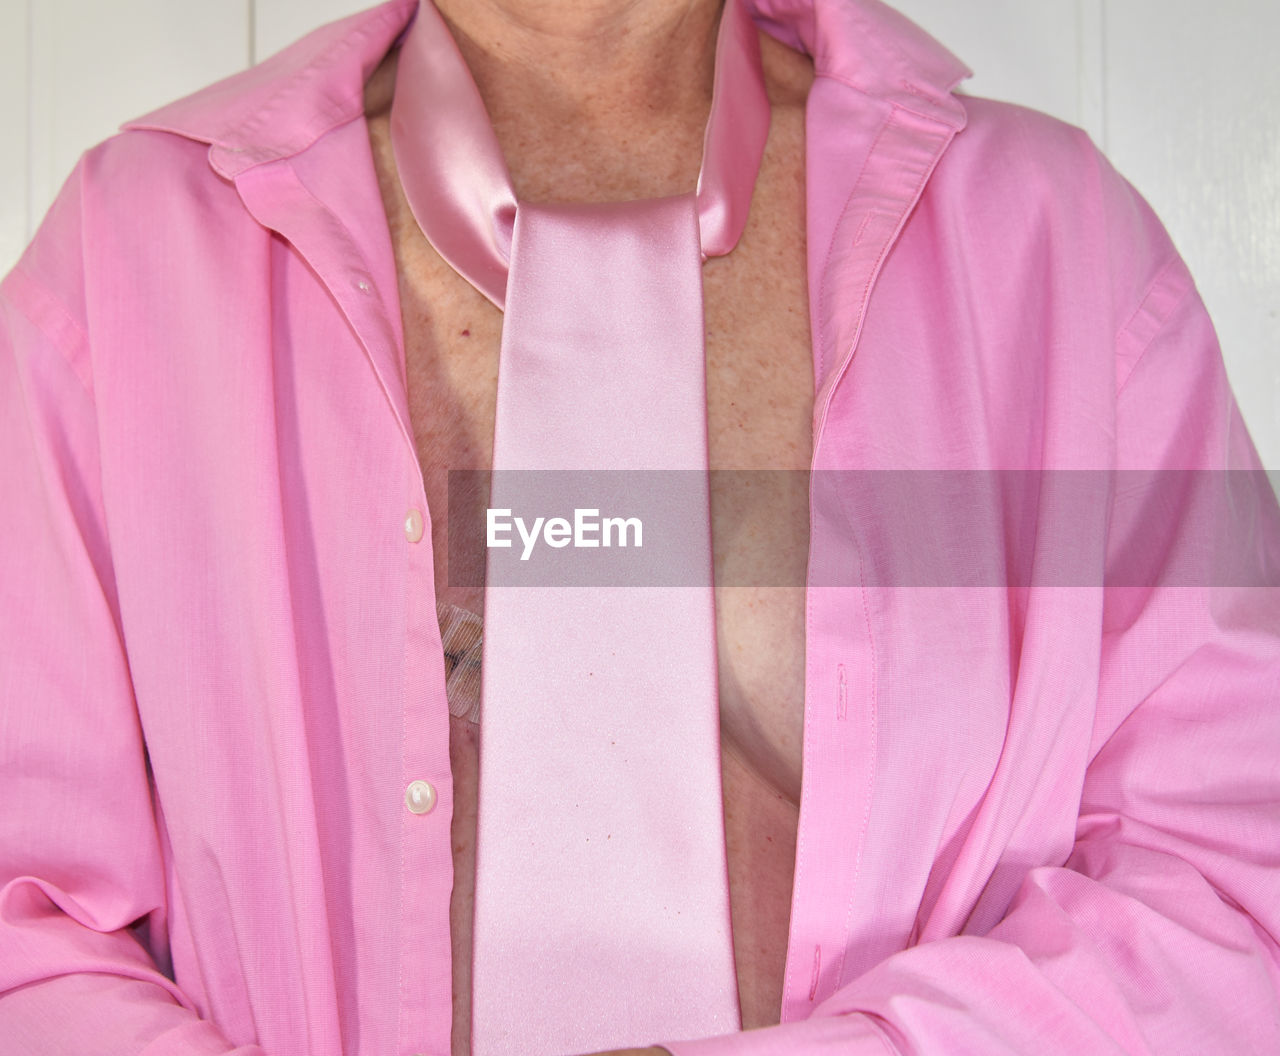 Midsection woman wearing pink shirt and tie